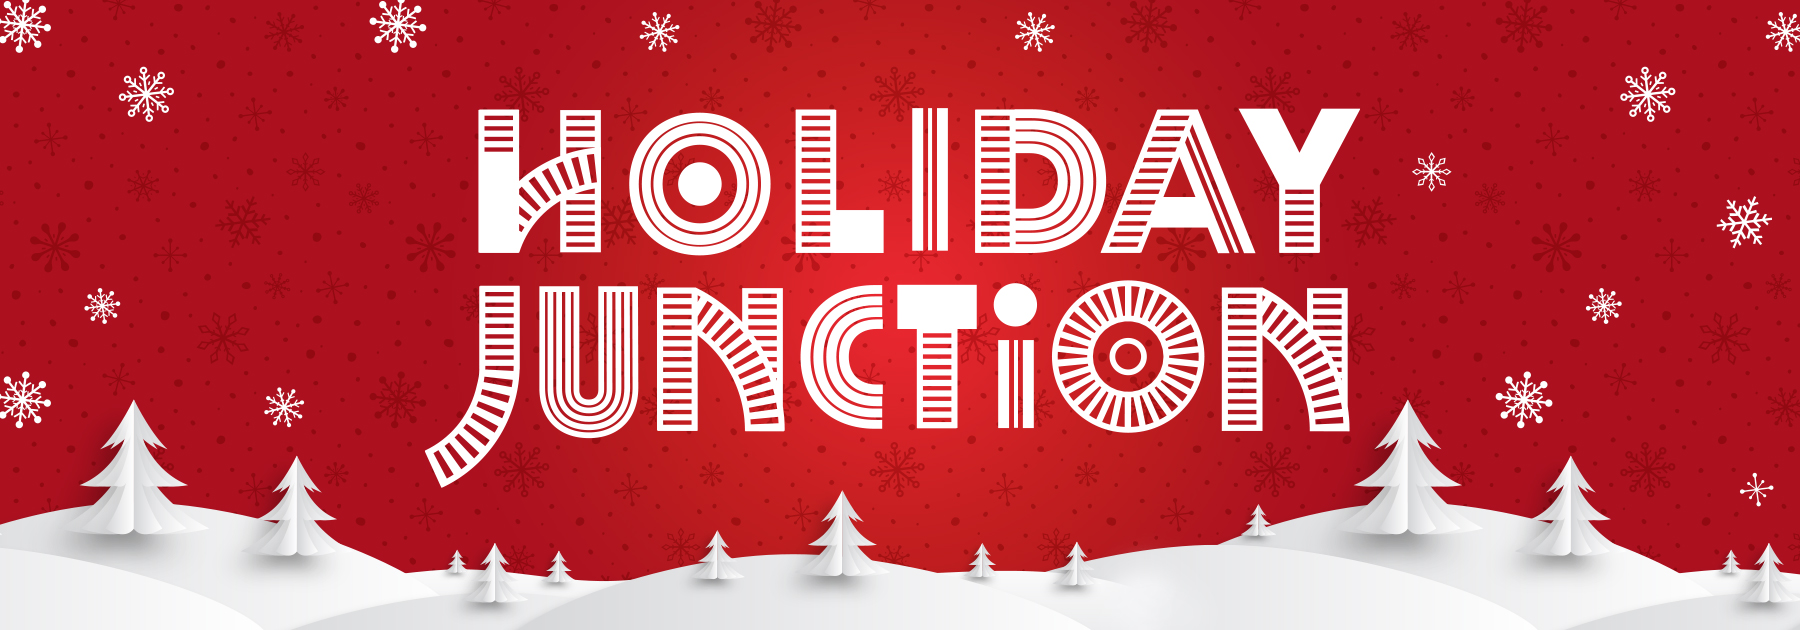 Promotional image from Holiday Junction exhibit